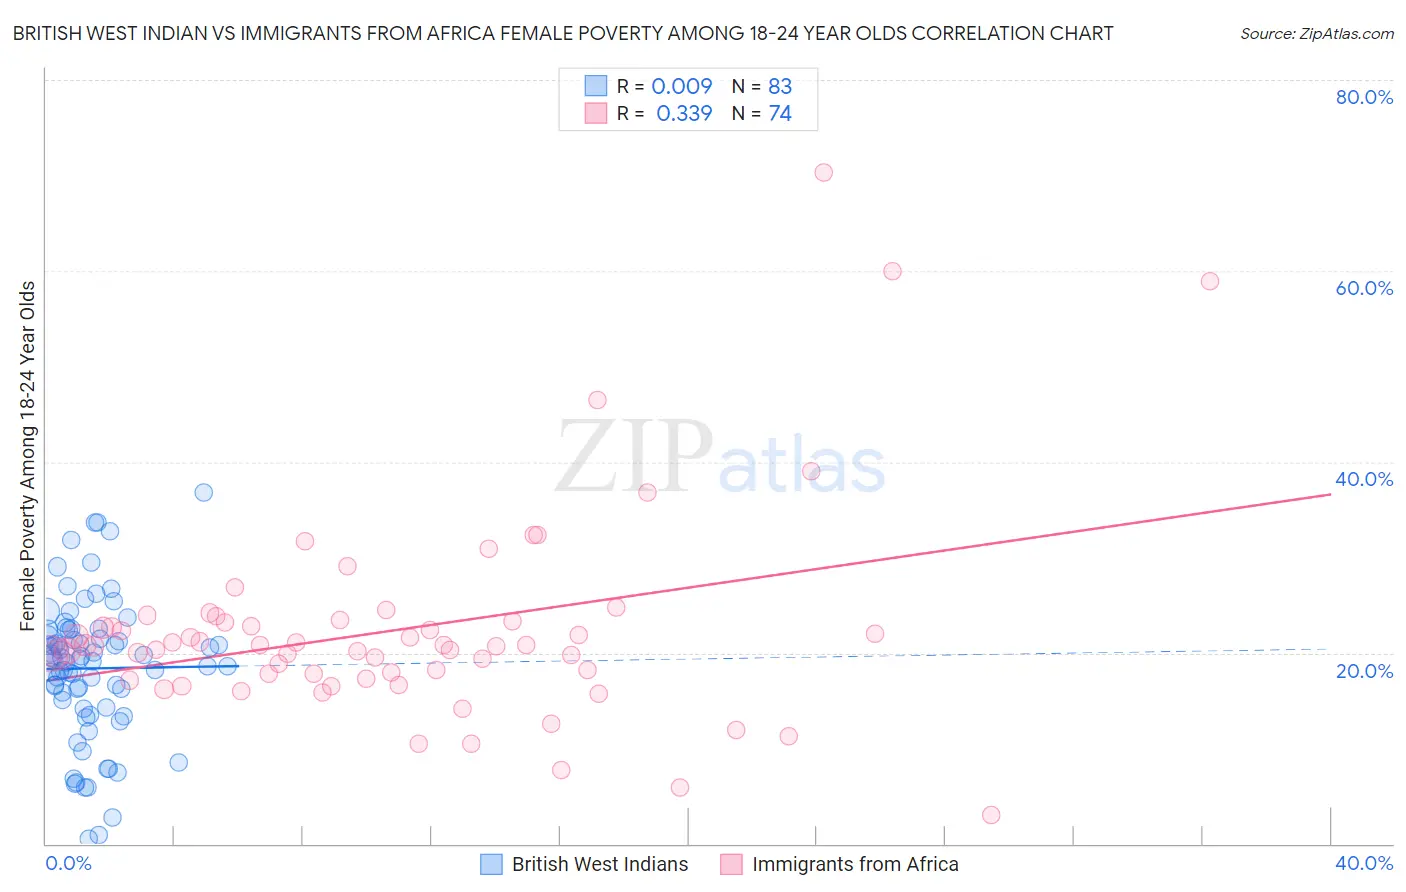 British West Indian vs Immigrants from Africa Female Poverty Among 18-24 Year Olds